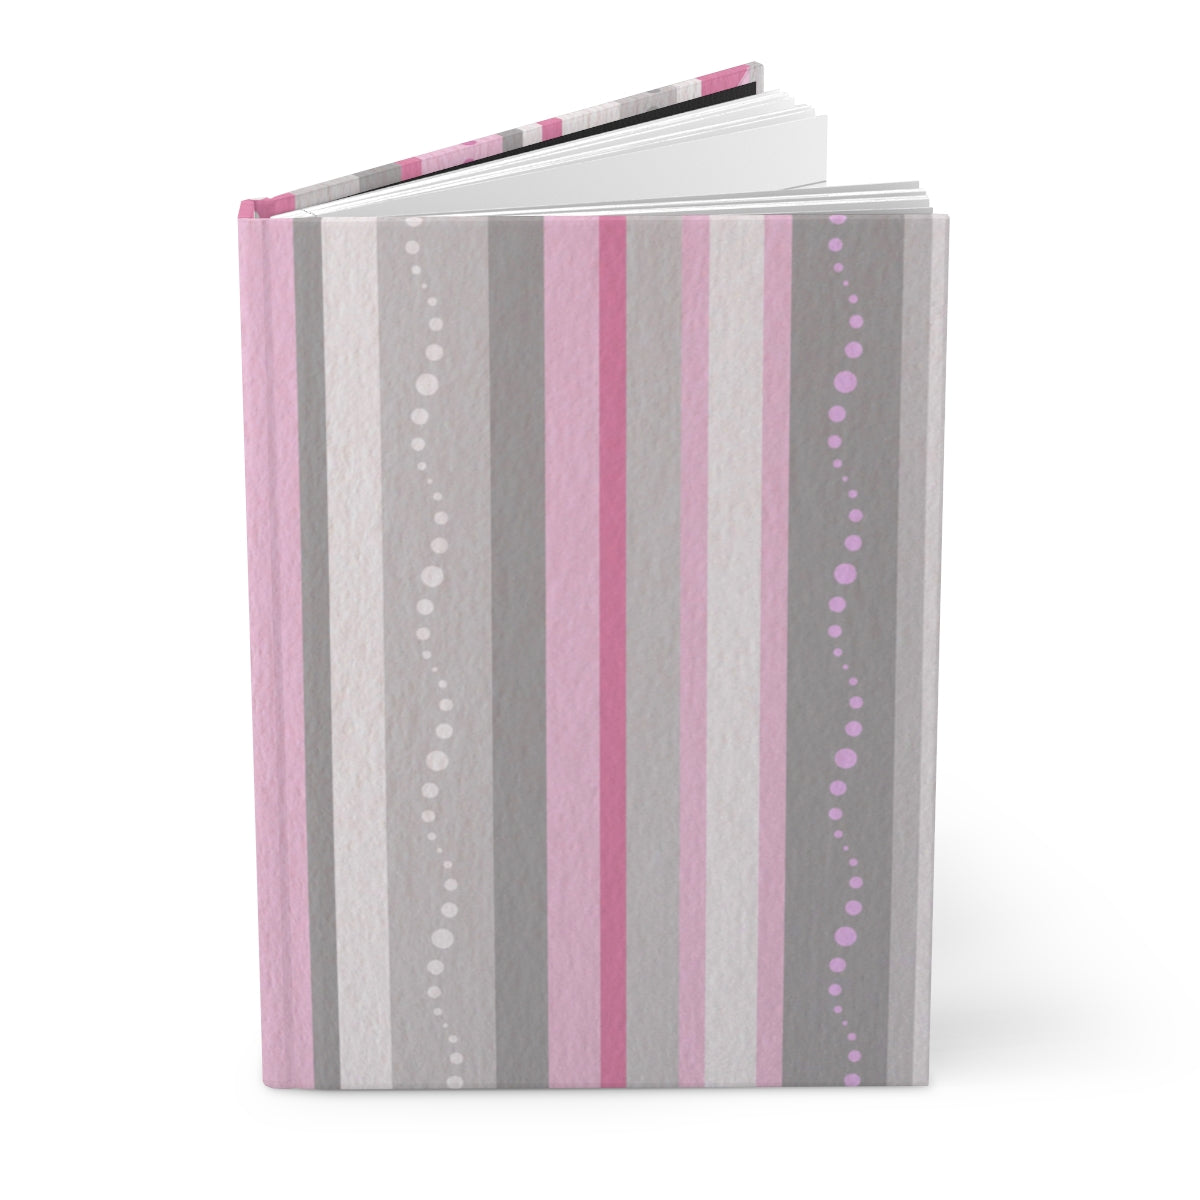 Sweater Weather Hardcover Matte Journal Paper products Pink Sweetheart